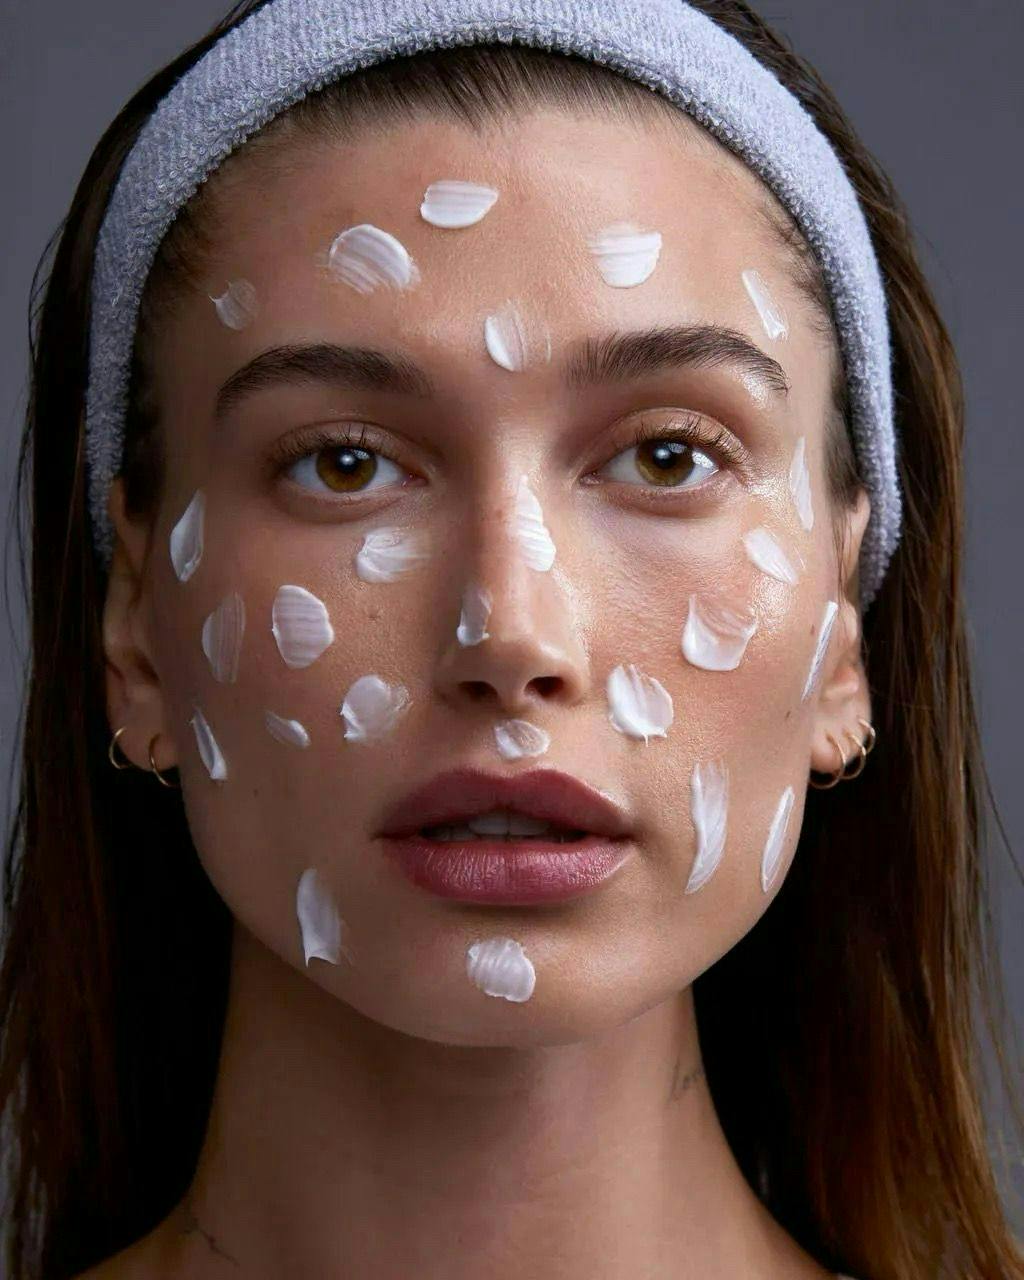 head person face skin adult female woman